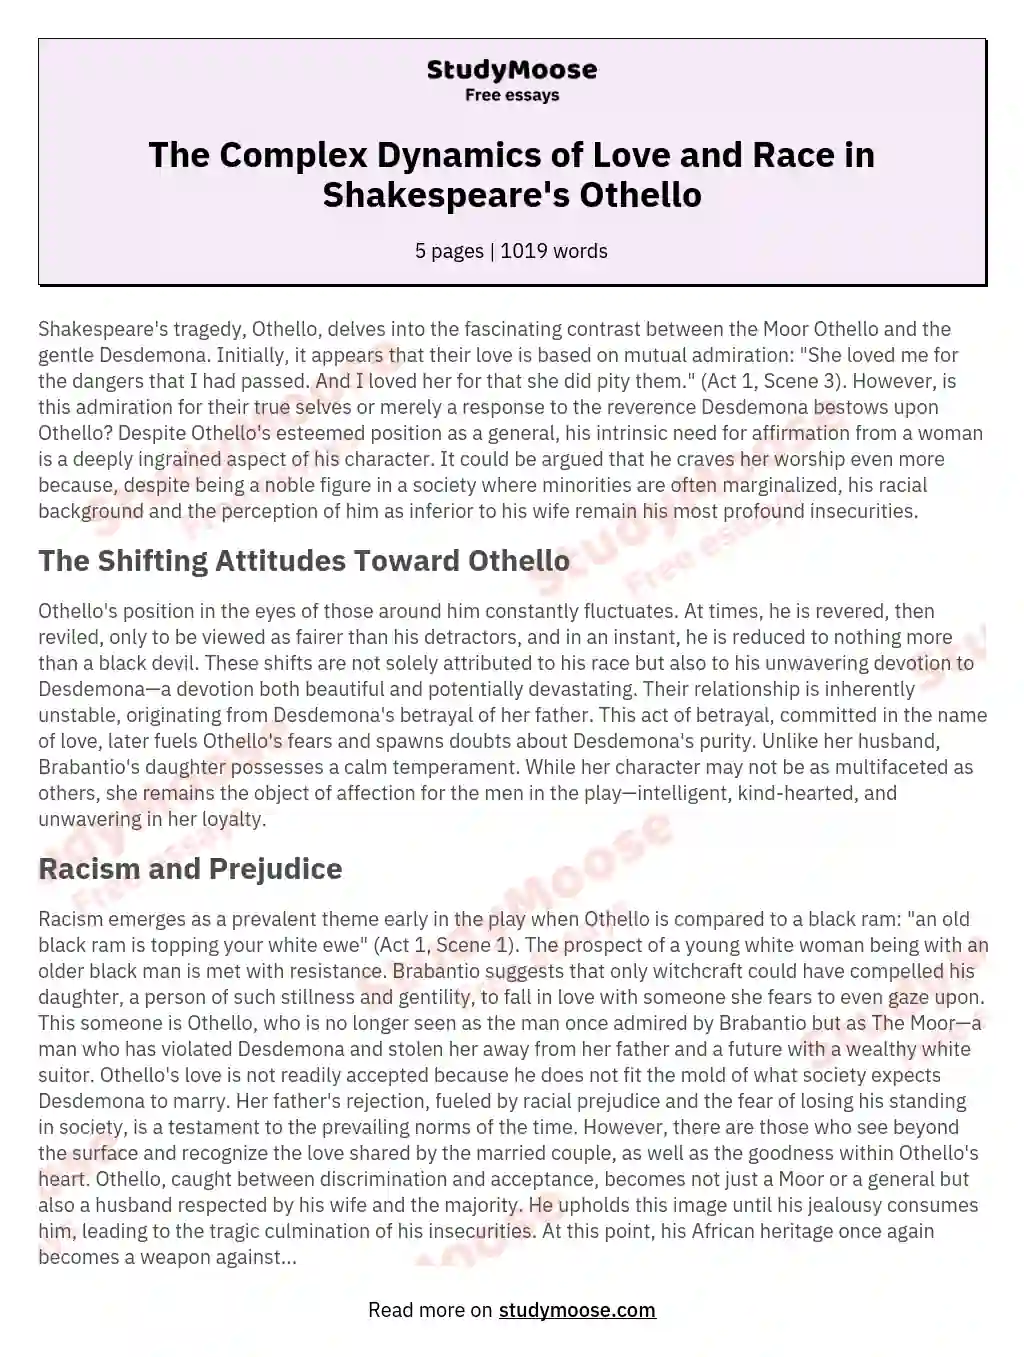 The Complex Dynamics of Love and Race in Shakespeare's Othello essay